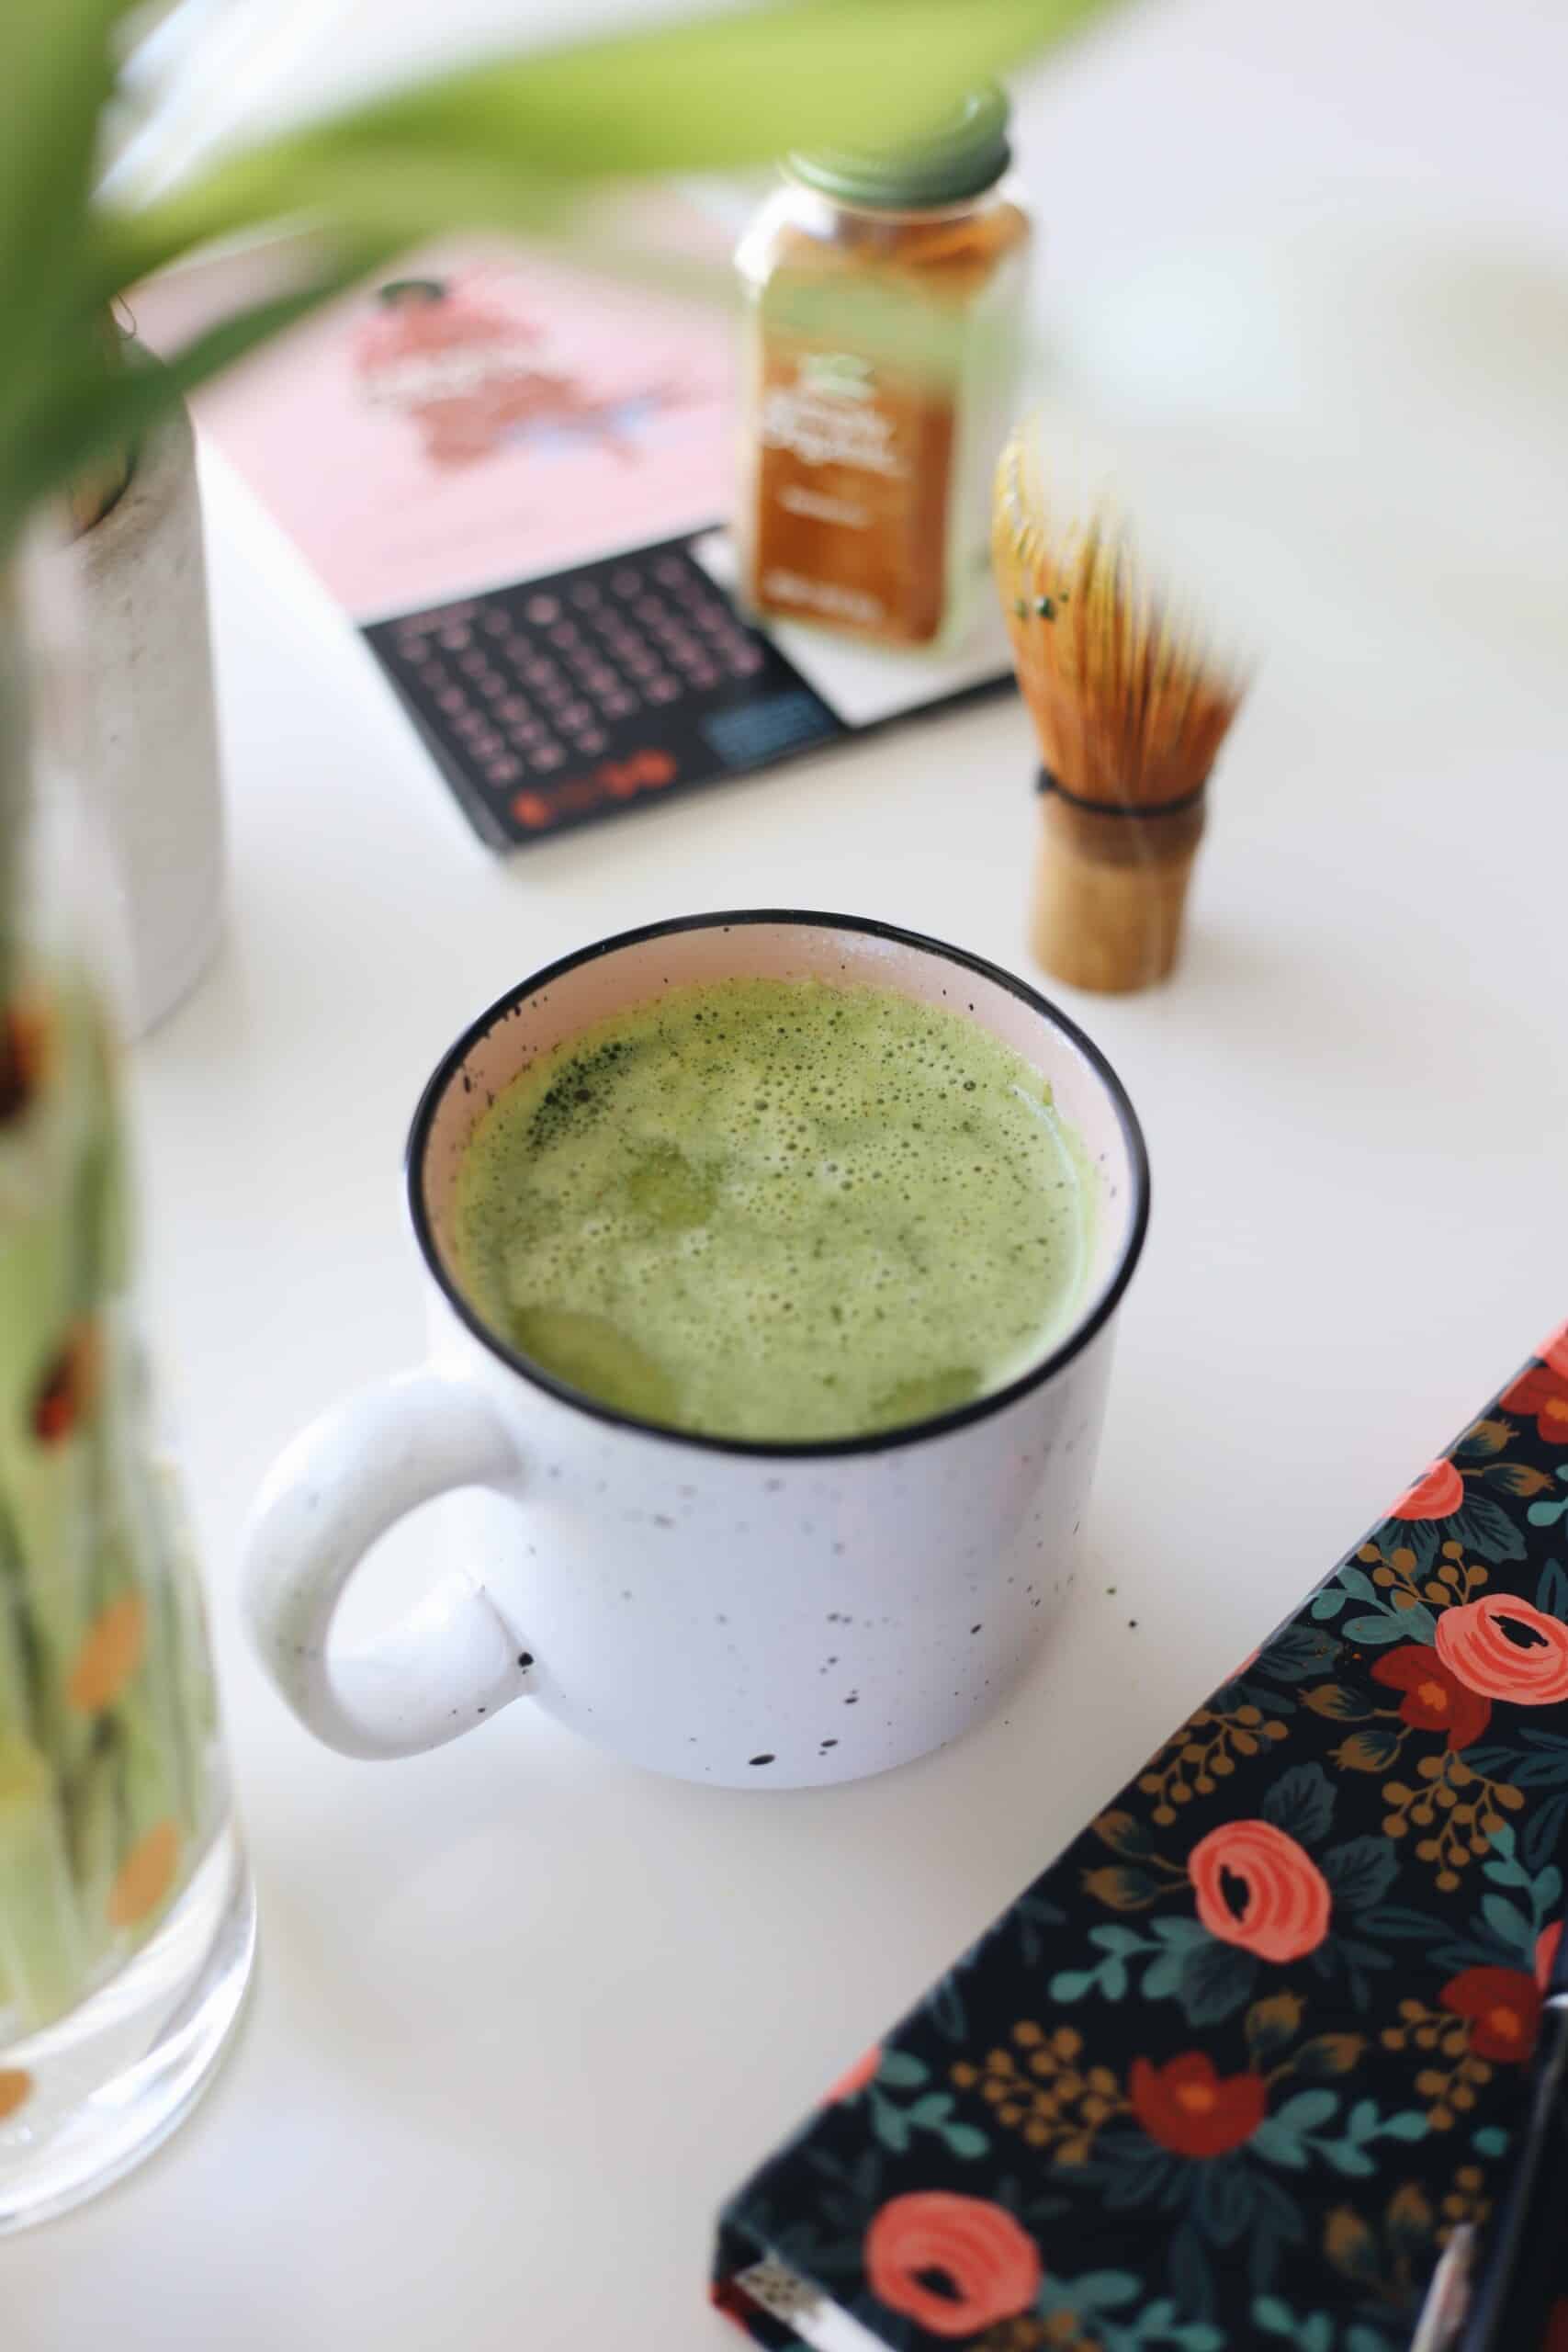 DIY Matcha Latte: How To Make This Delicious Healthy Coffee